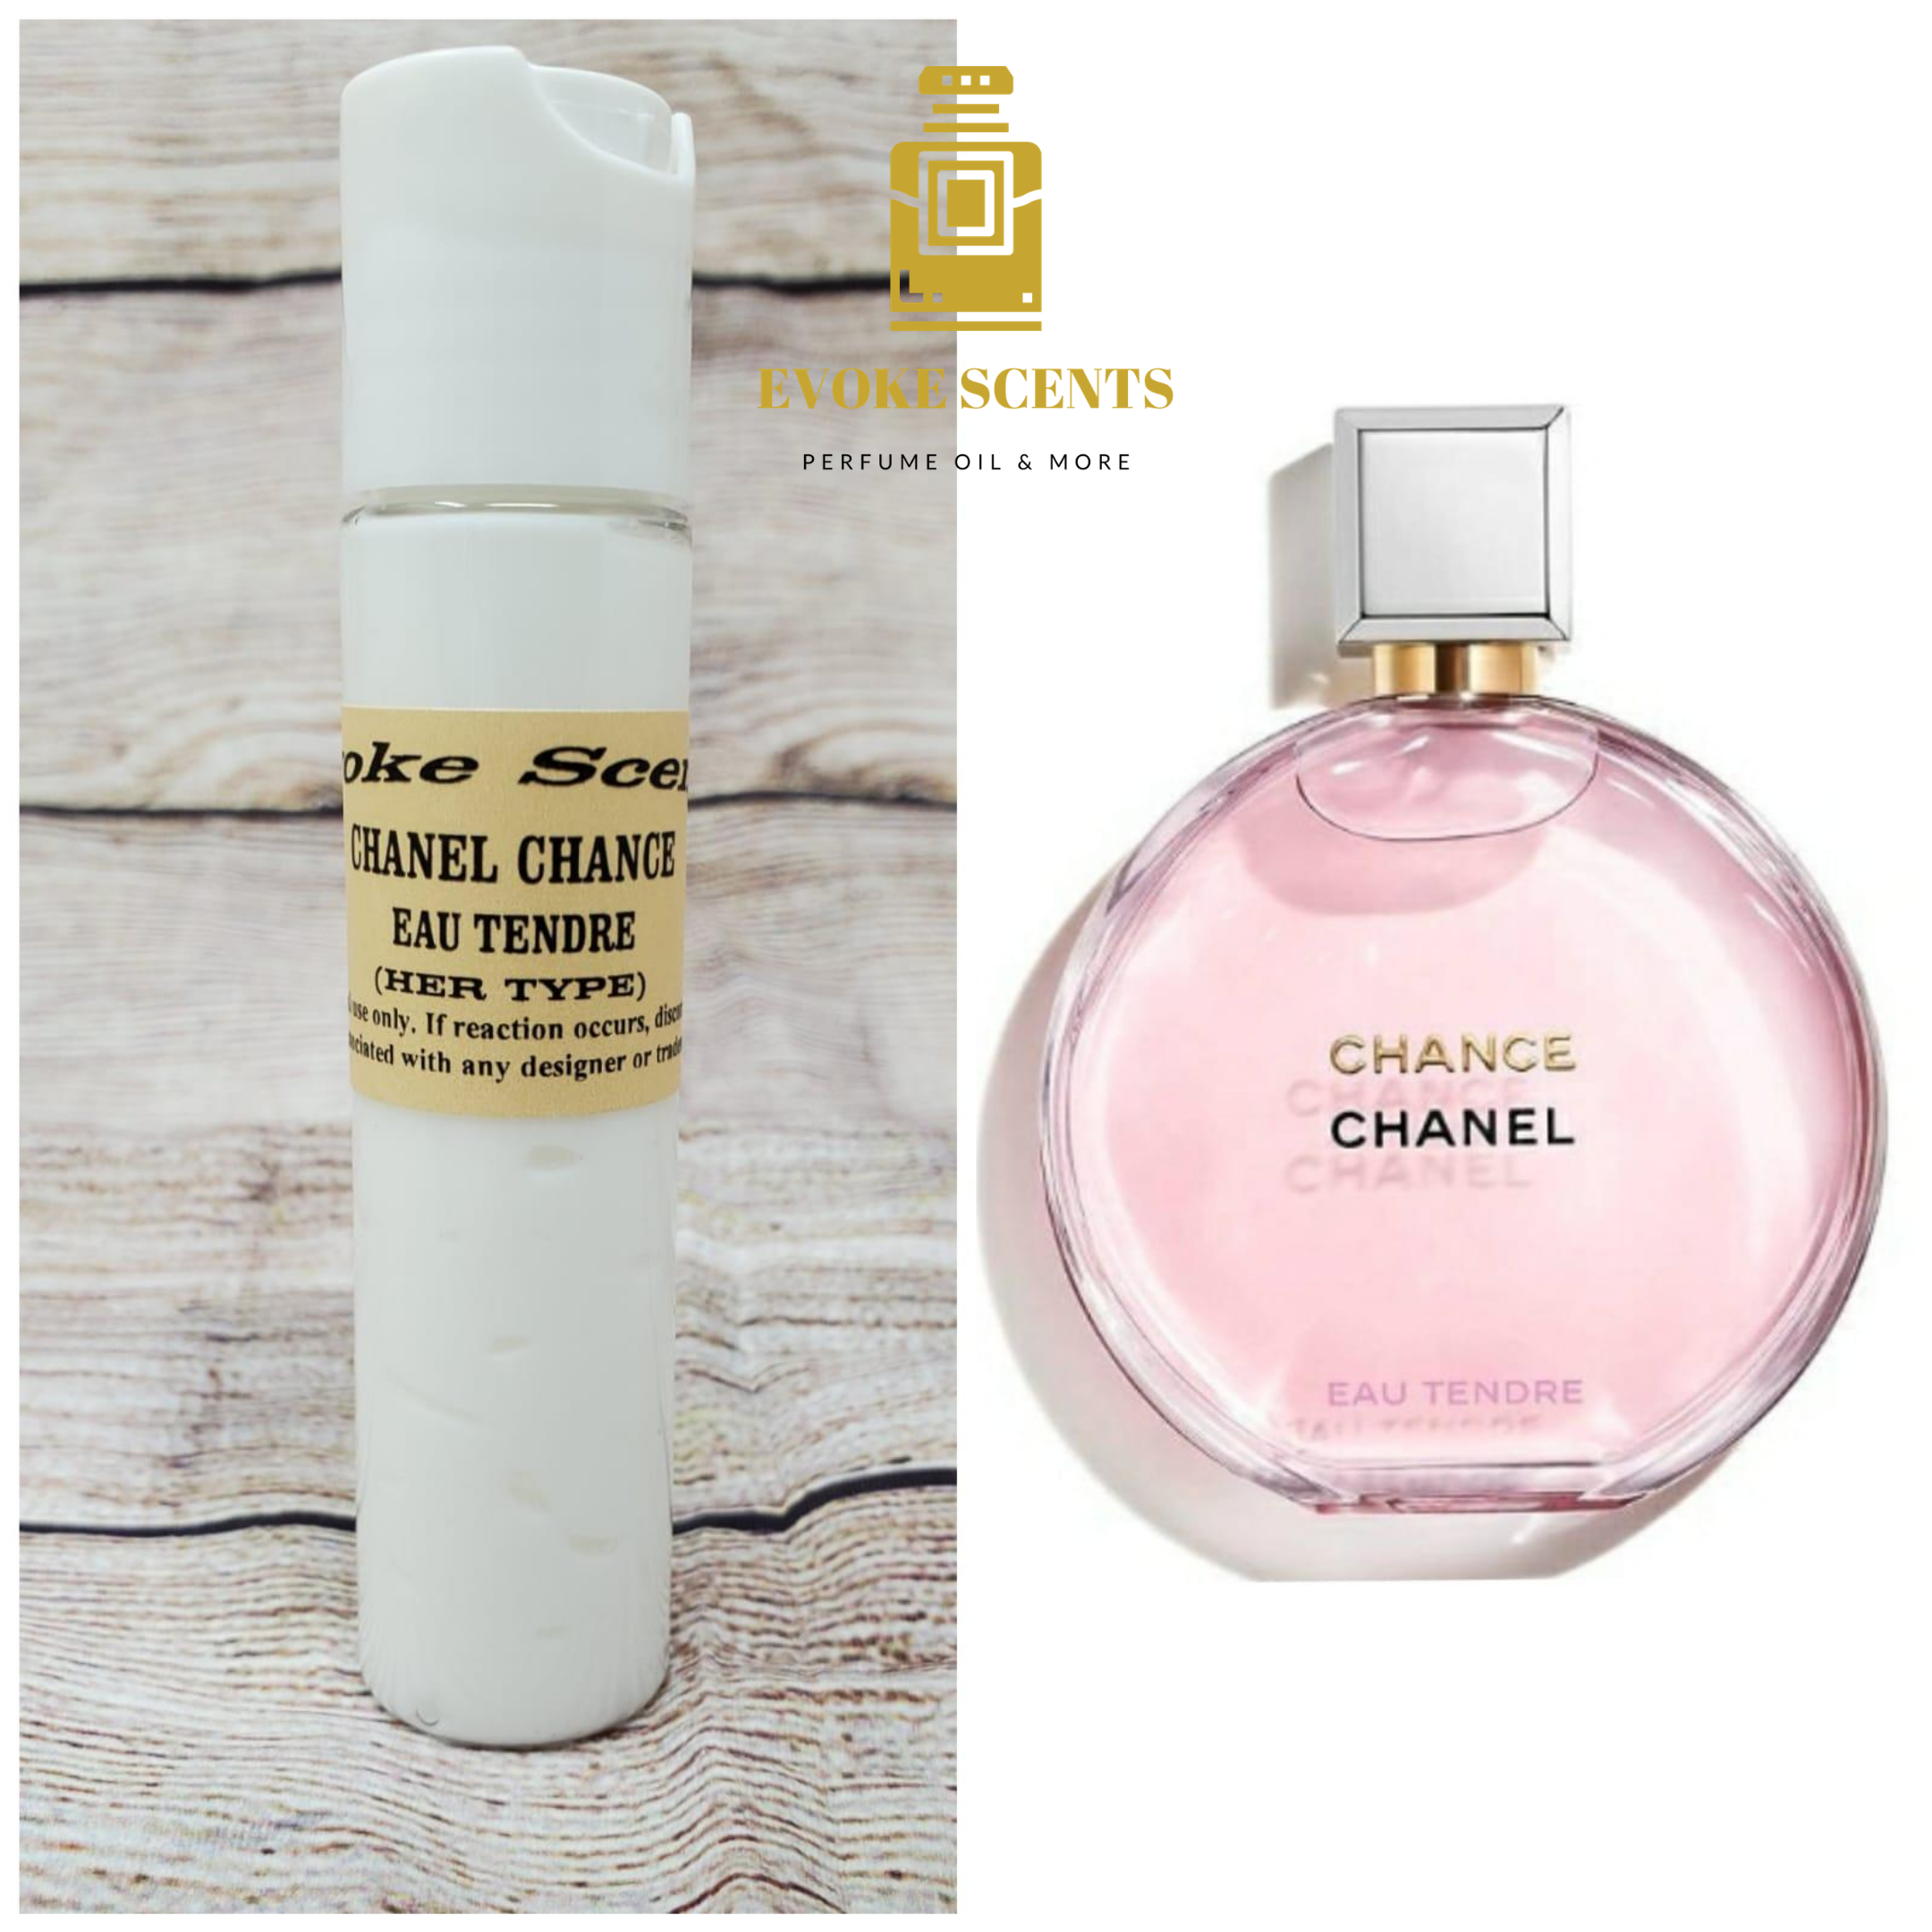 Chance by Chanel for Women